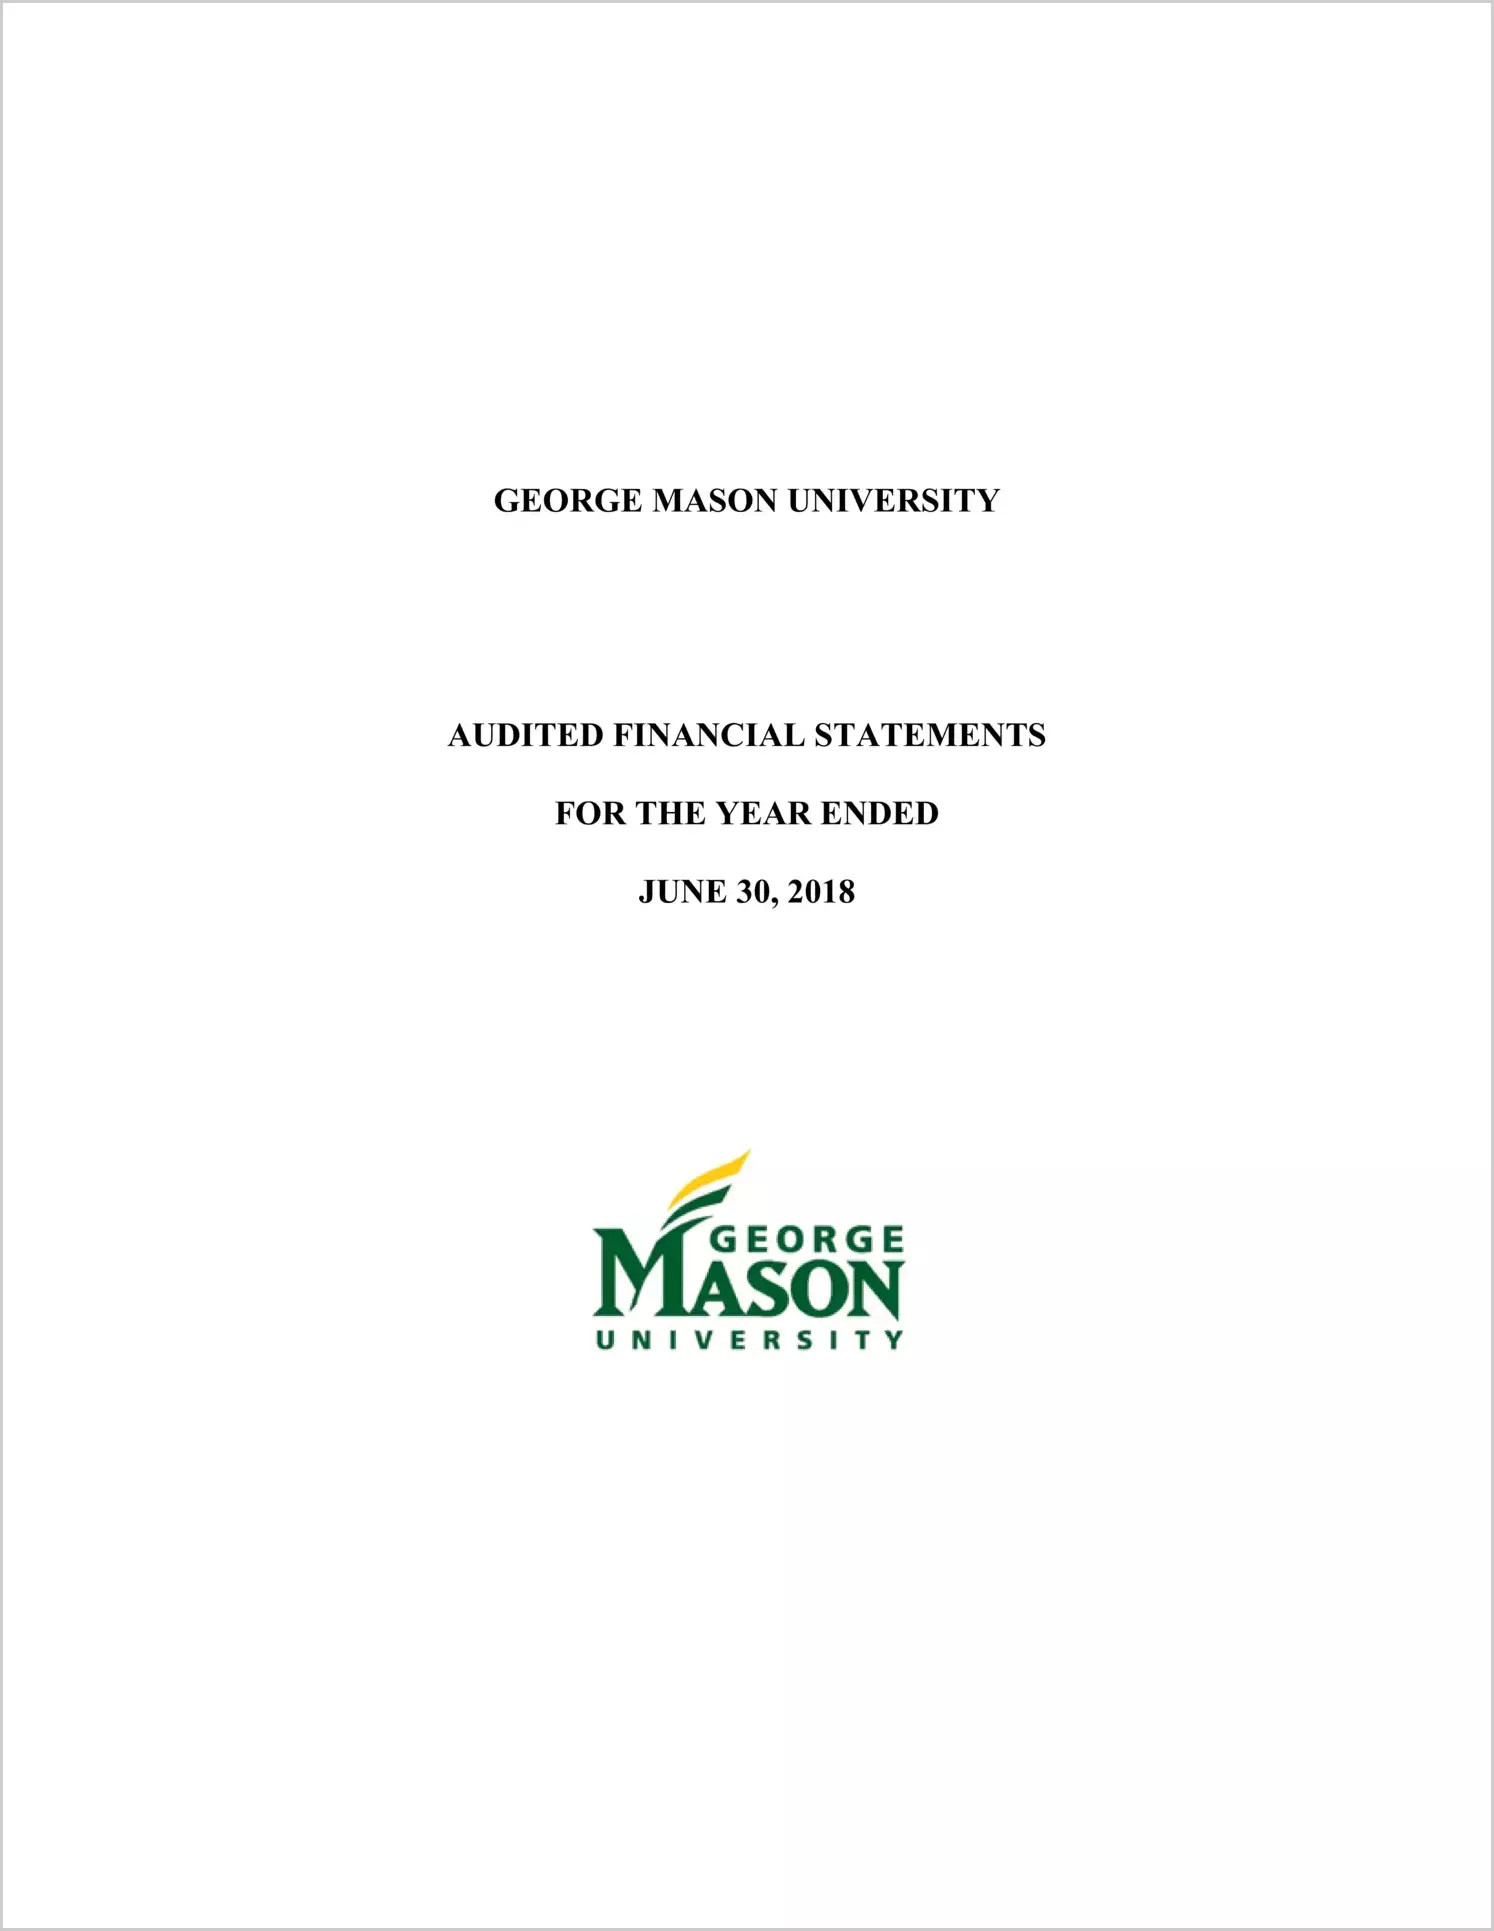 George Mason University Financial Statements for the year ended June 30, 2018